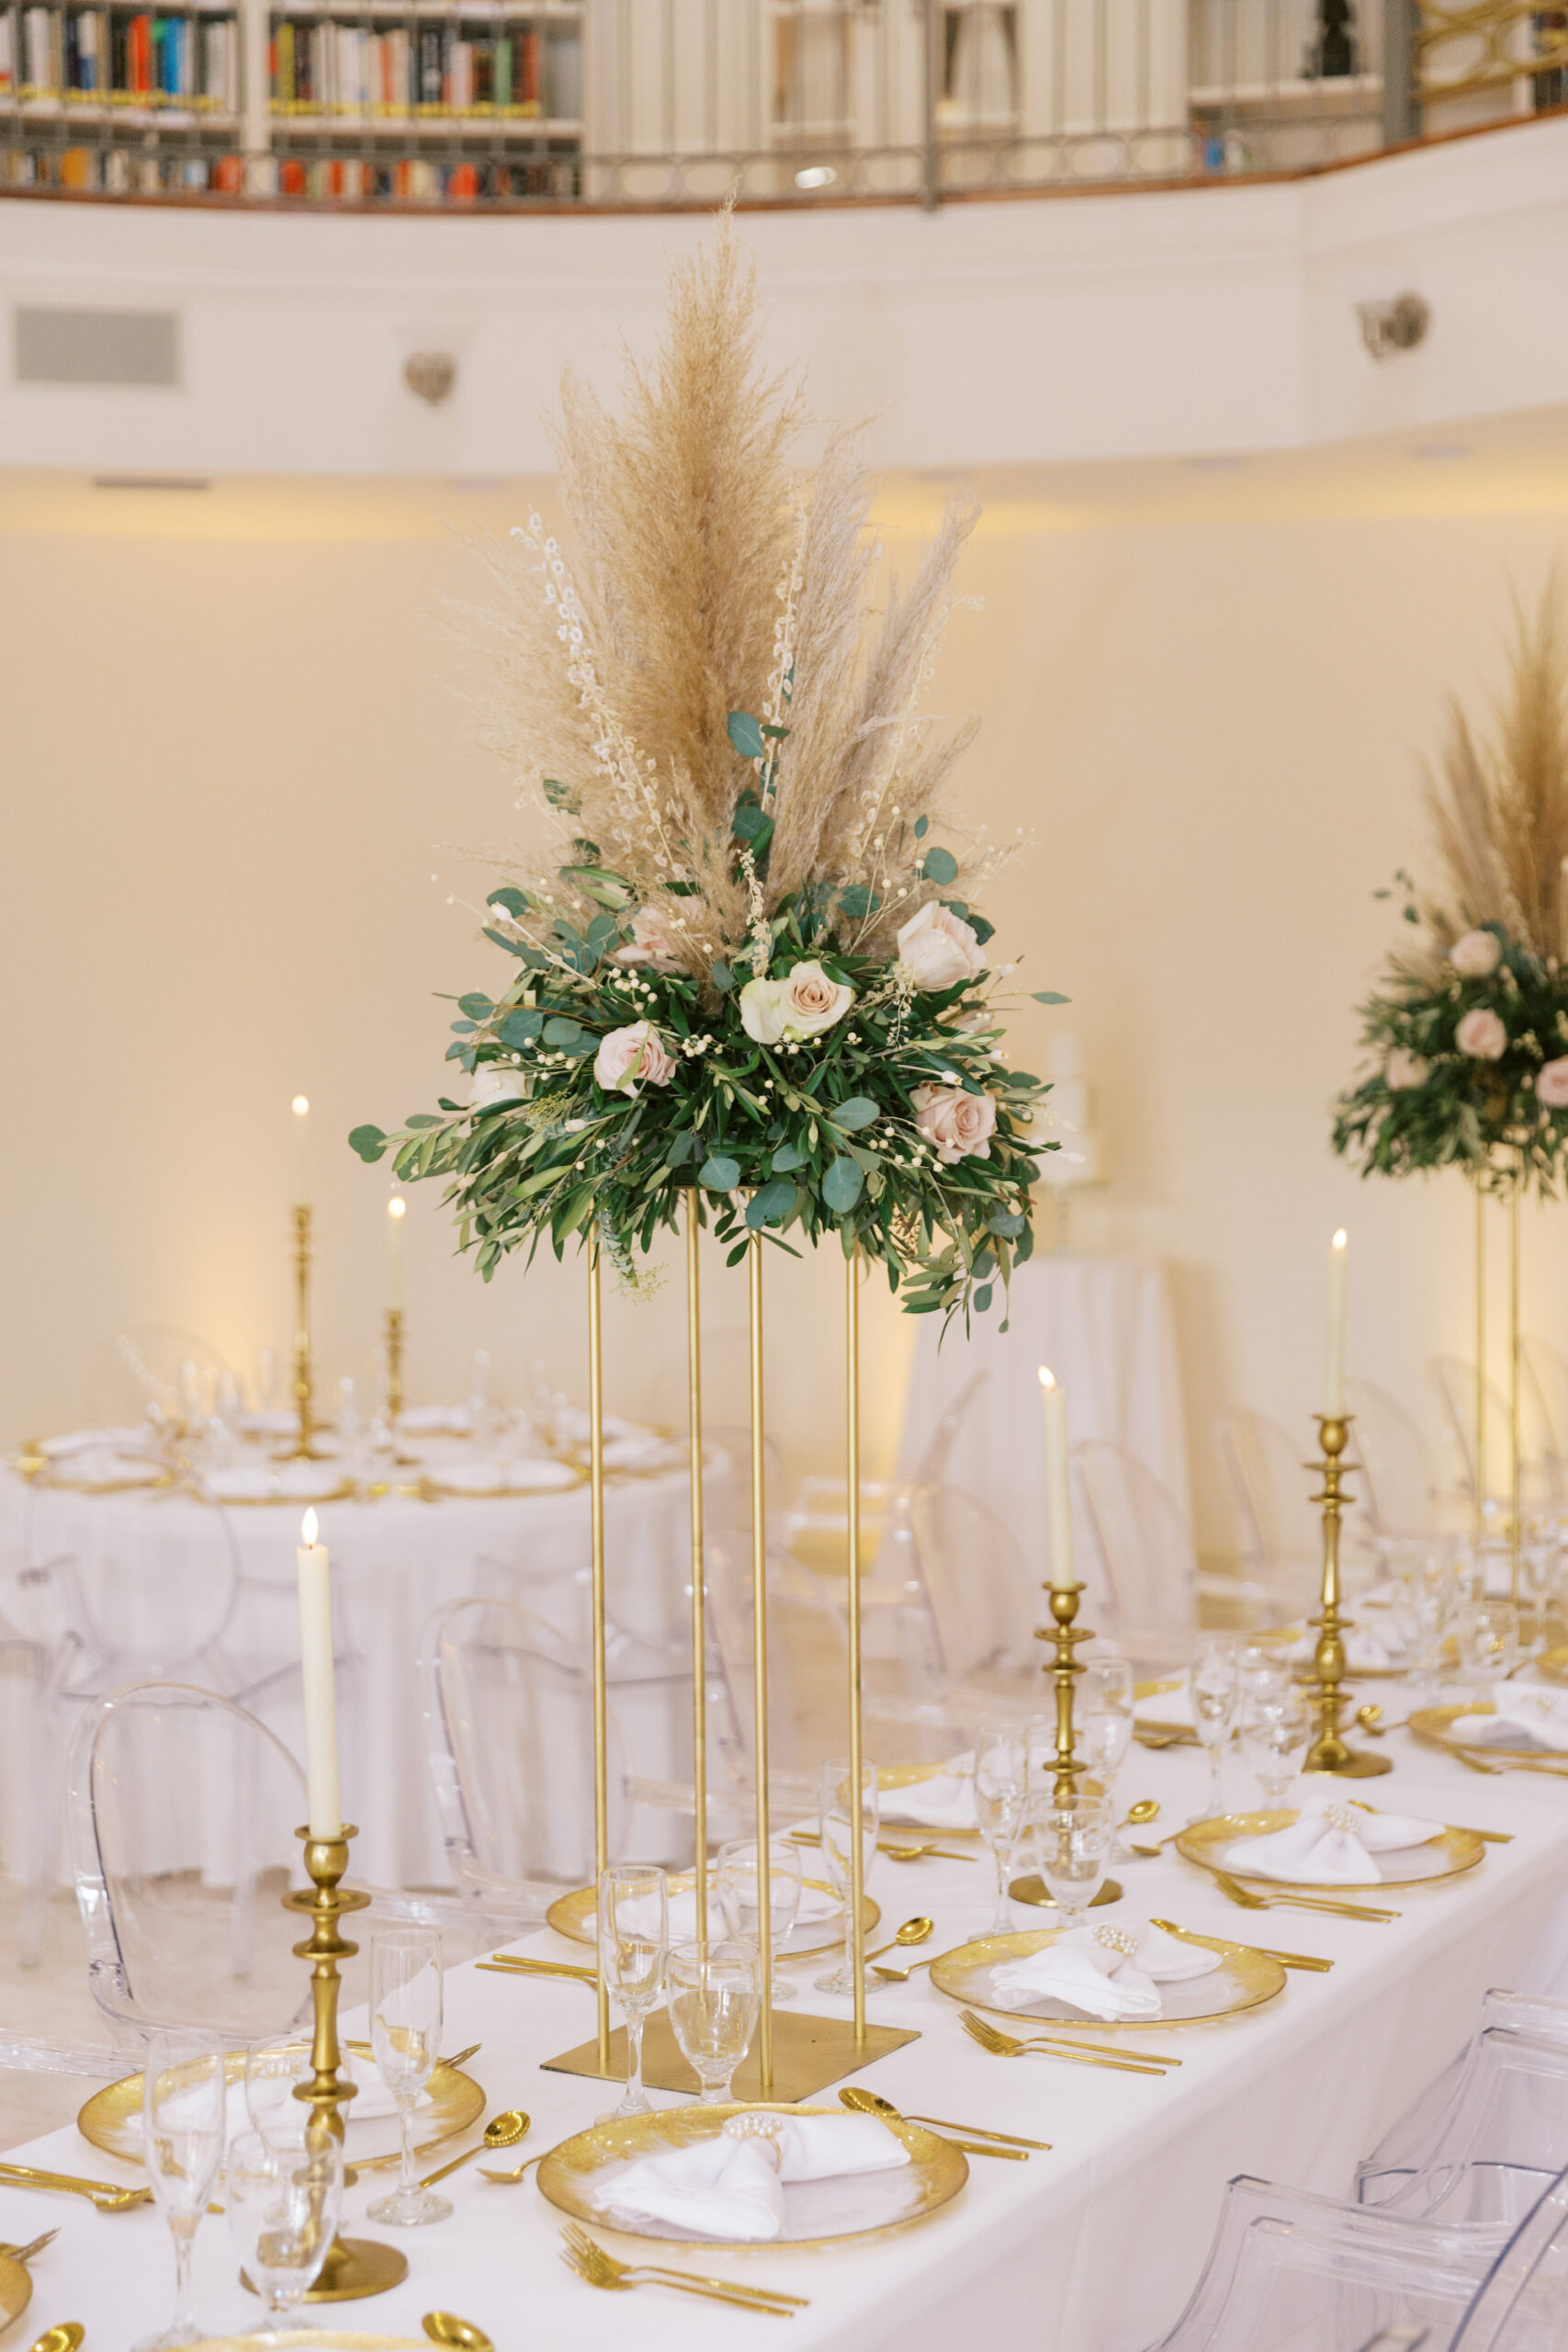 Vintage Old Hollywood Gatsby Inspired Wedding Reception at The Whitehurst Gallery Wedding Venue, Long Head Feasting Table, Round Circle Table, White Linens, Gold Chargers, Tall Floral Centerpieces | Gabro Event Services | Outside The Box Event Rentals